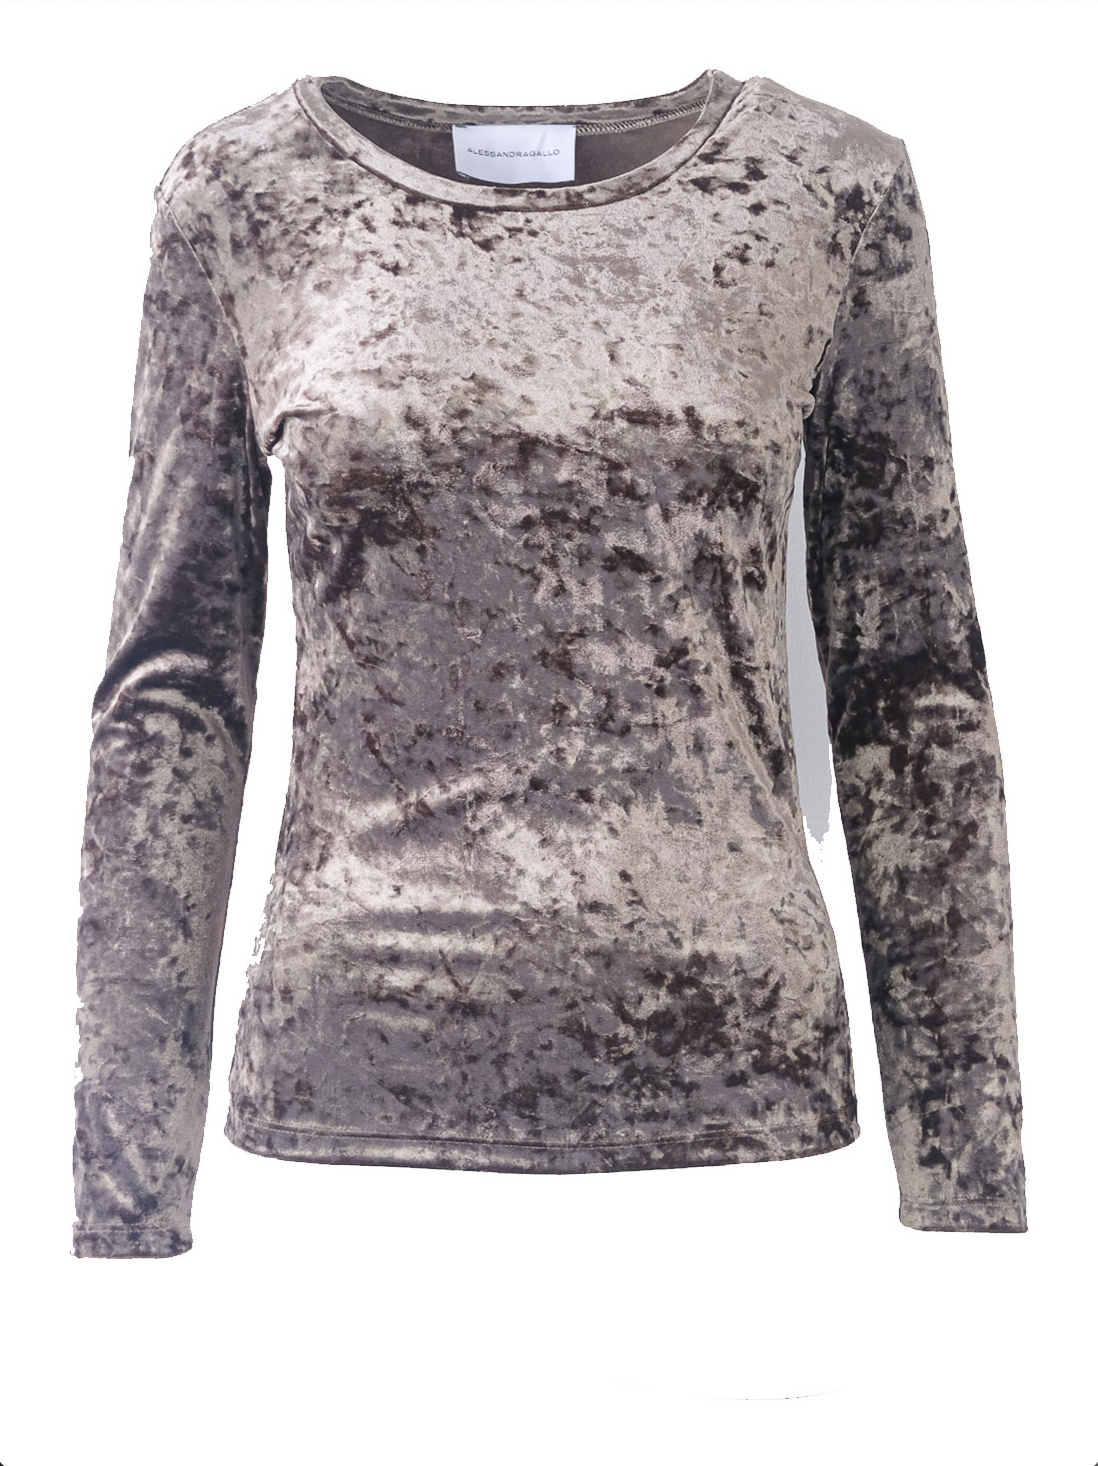 VIOLET - brown hammered chenille sweater